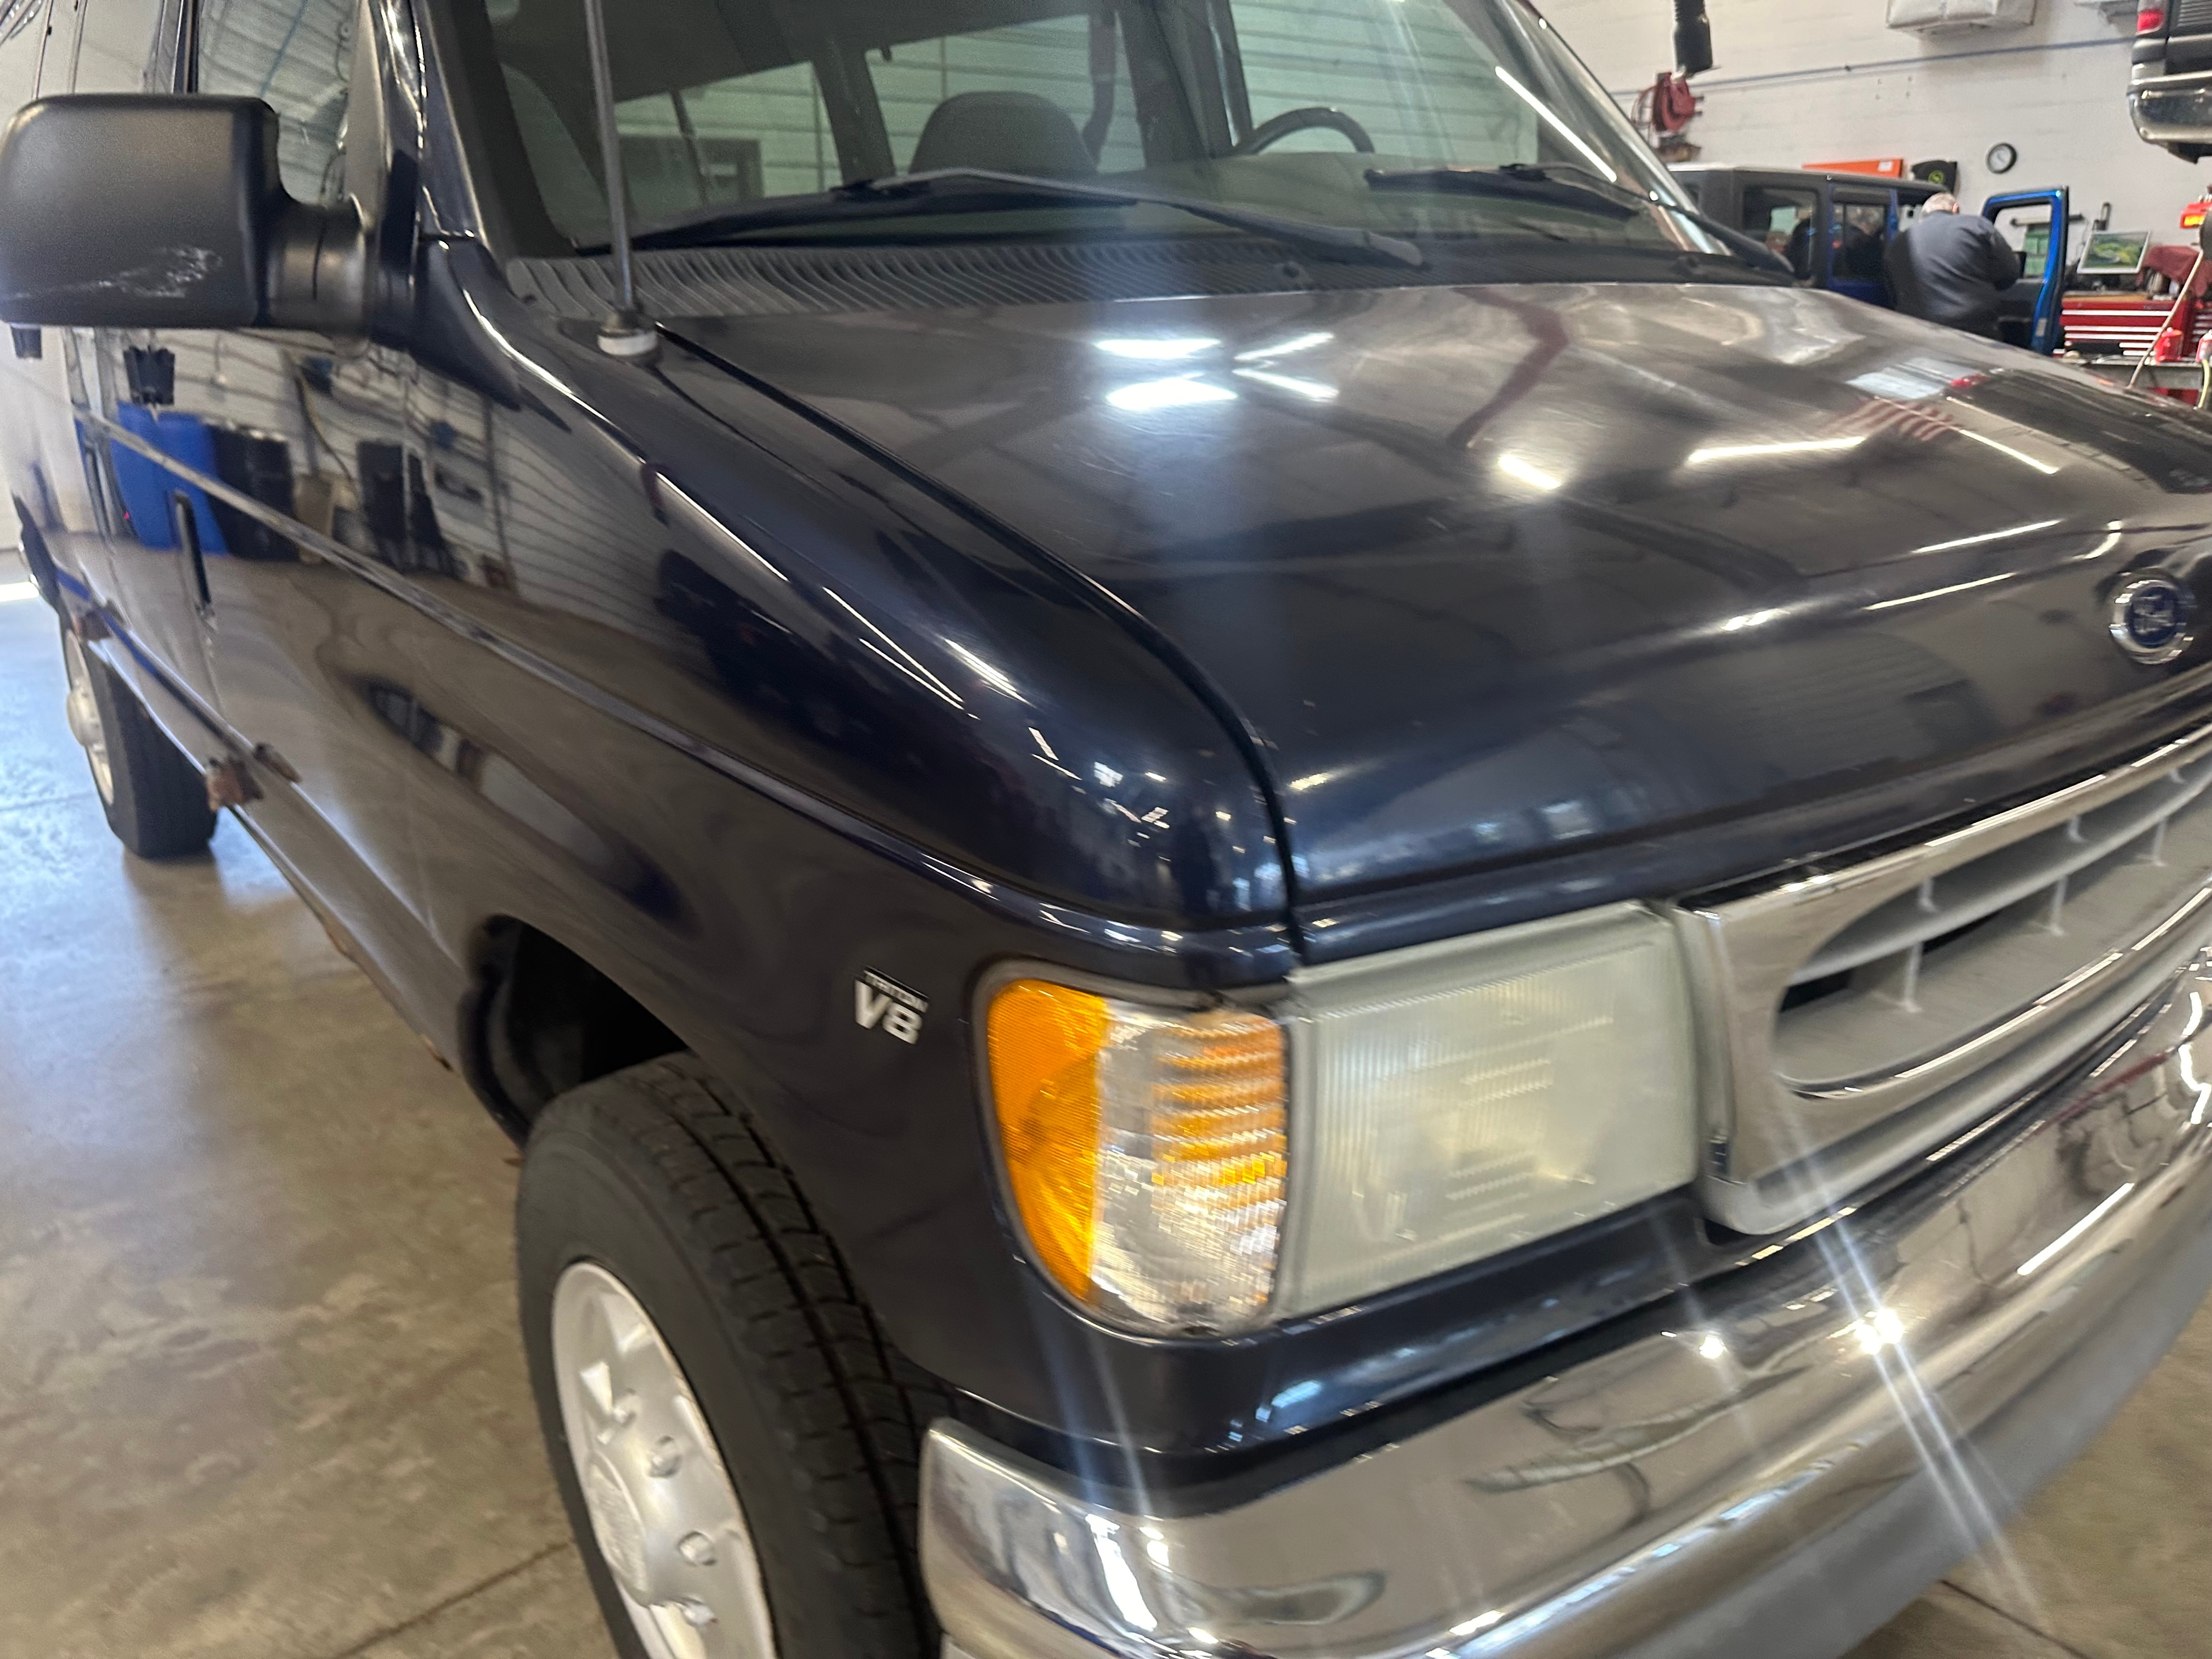 Used 2002 Ford Econoline Wagon XL with VIN 1FBNE31L92HA68520 for sale in Galena, IL